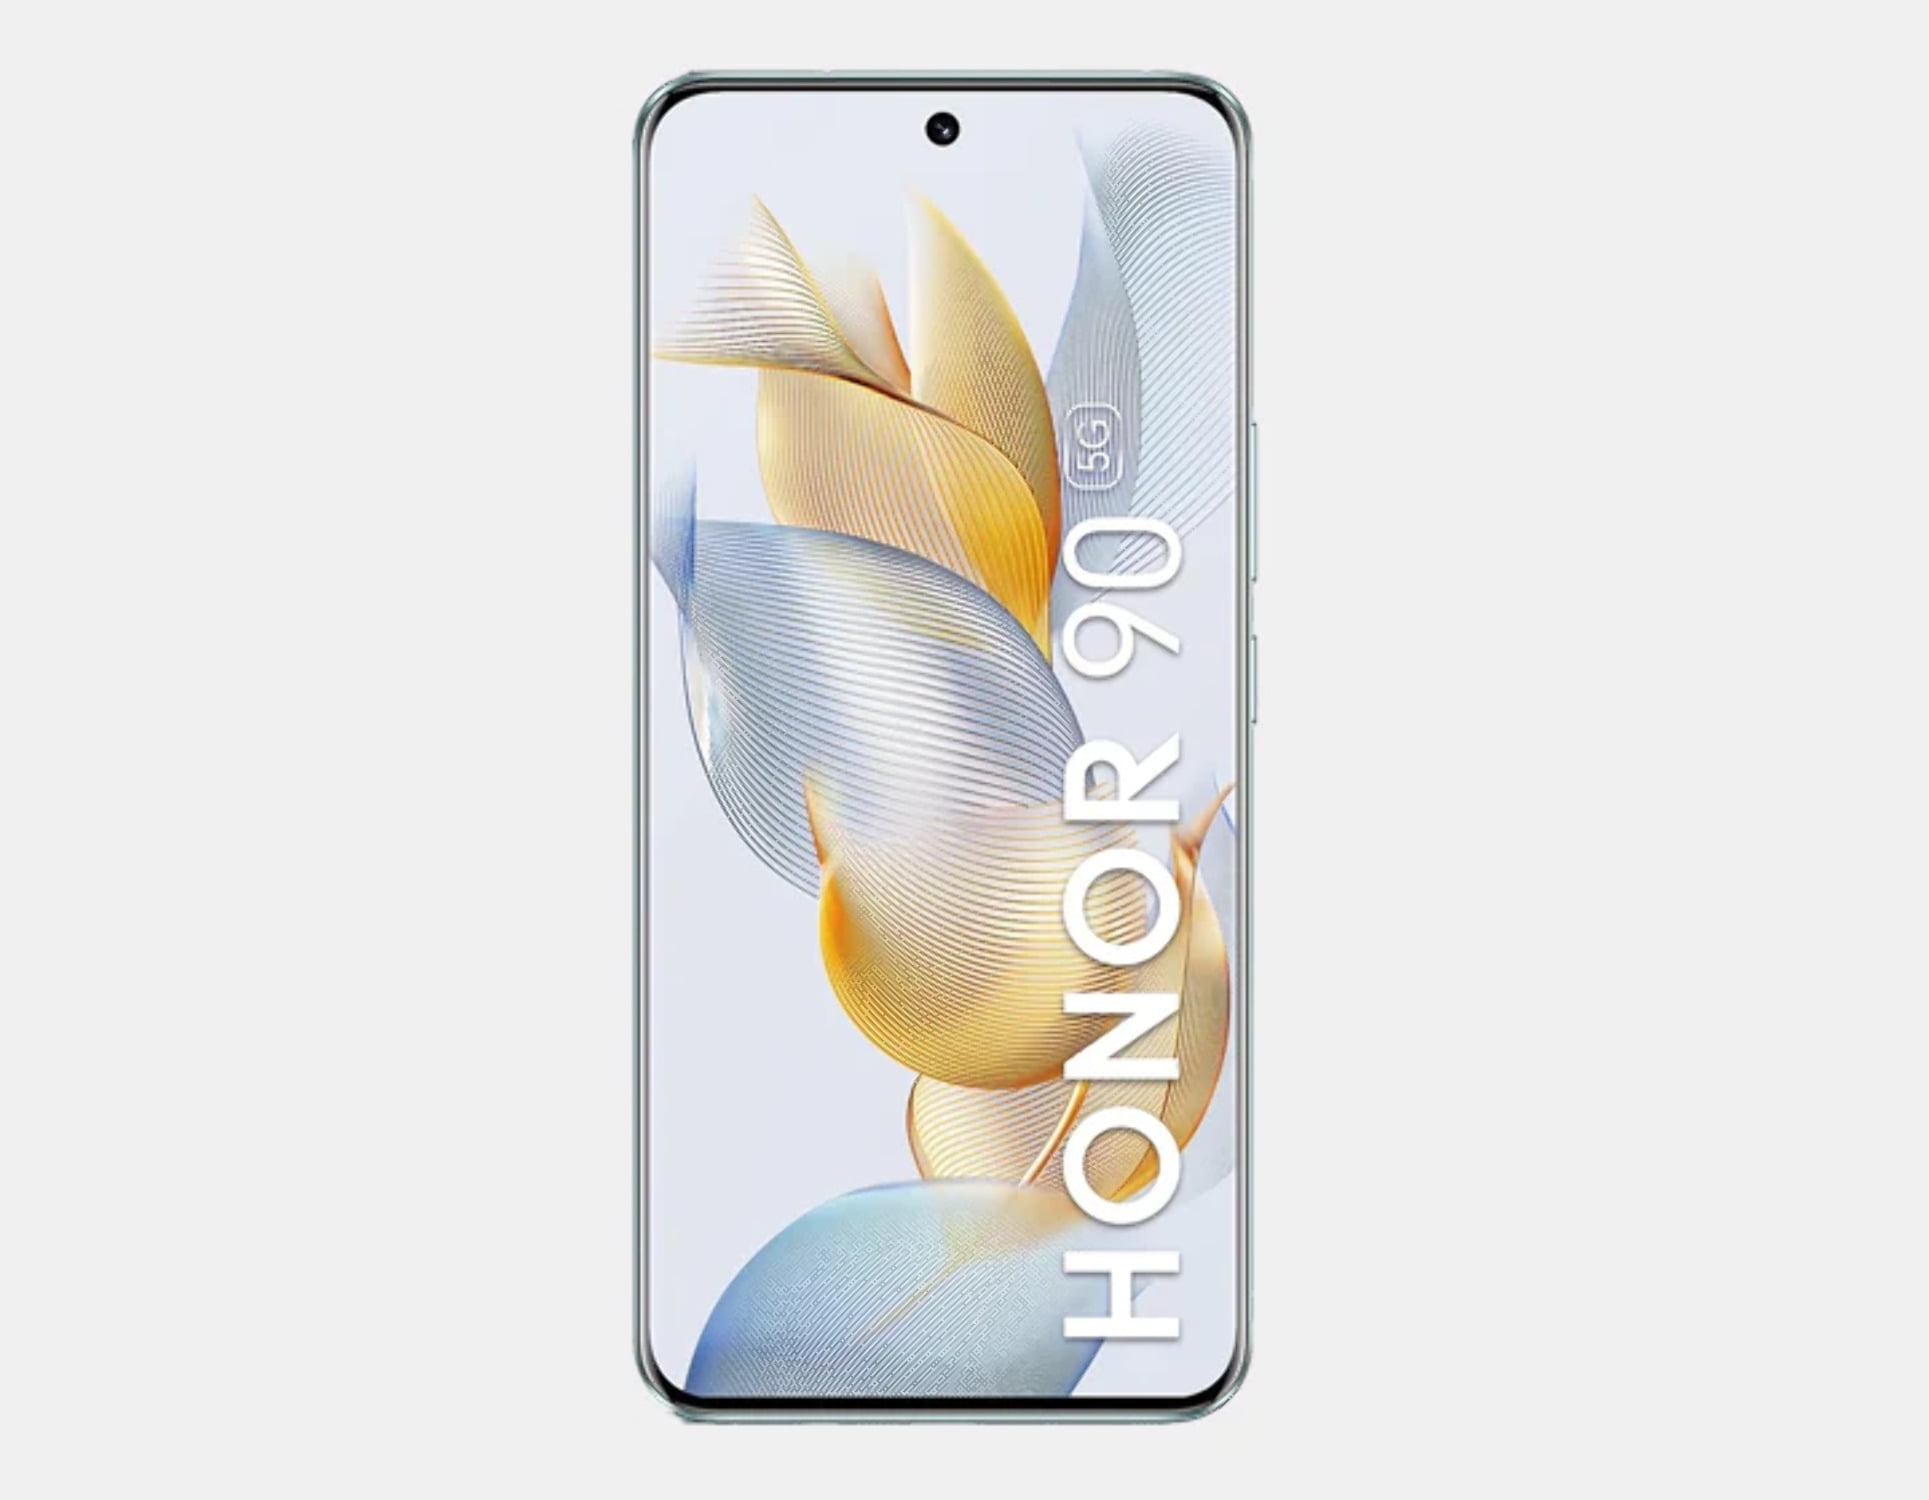 Honor 90 5G REA-AN00 Diamond Silver 512GB 12GB RAM Gsm Unlocked Phone  Qualcomm Snapdragon 7 Gen 1 Accelerated Edition 200MP Display 6.7-inch  Chipset Qualcomm Snapdragon 7 Gen 1 Accelerated Edition Front Camera